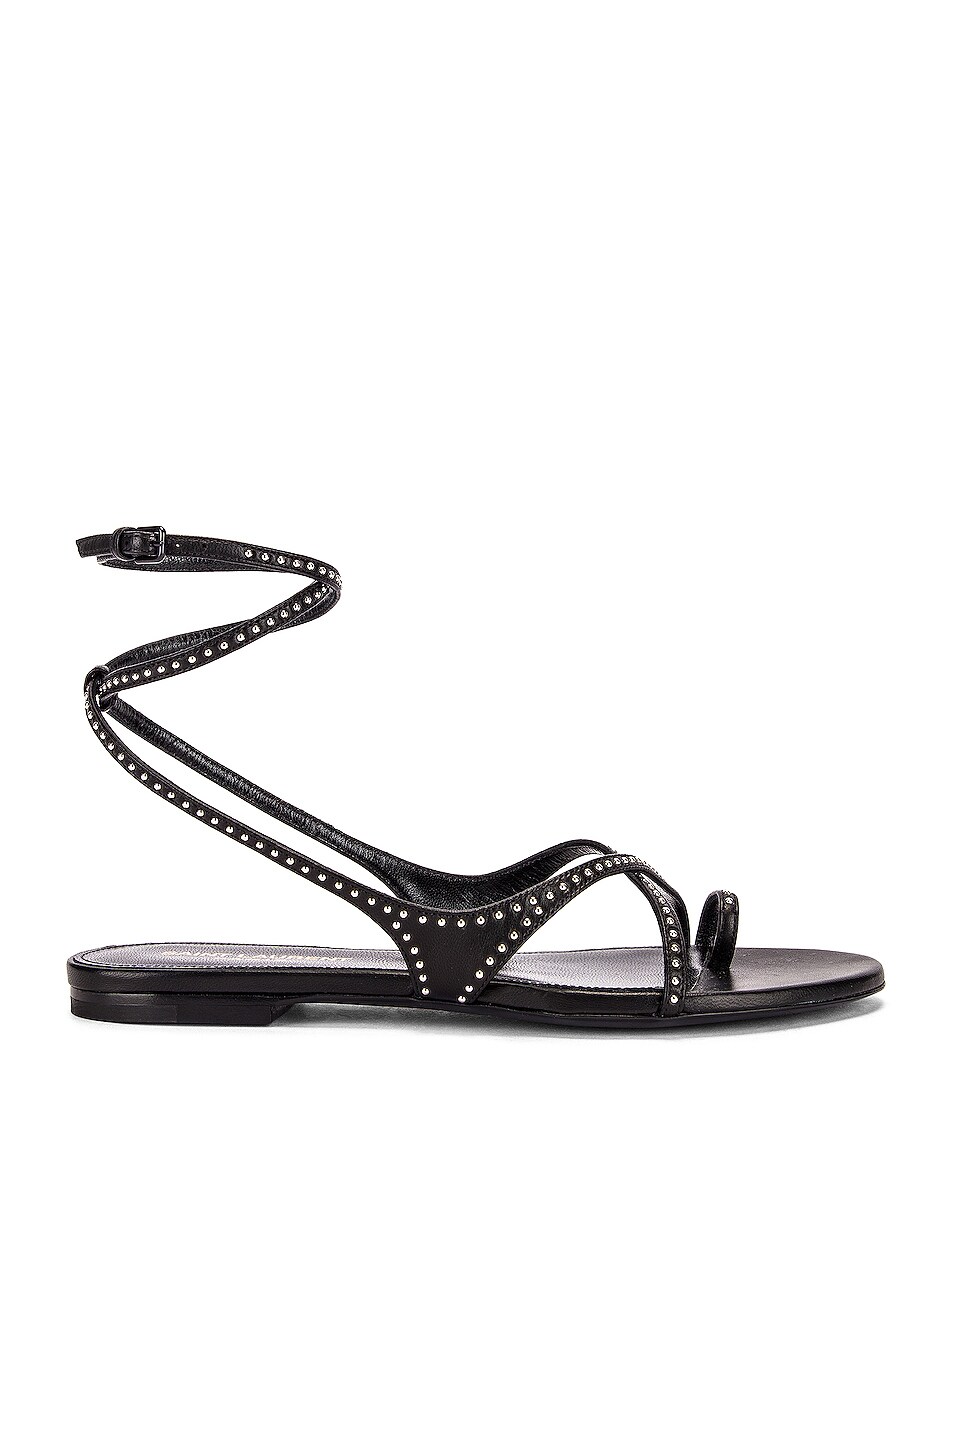 Image 1 of Saint Laurent Gia Ankle Sandals in Black